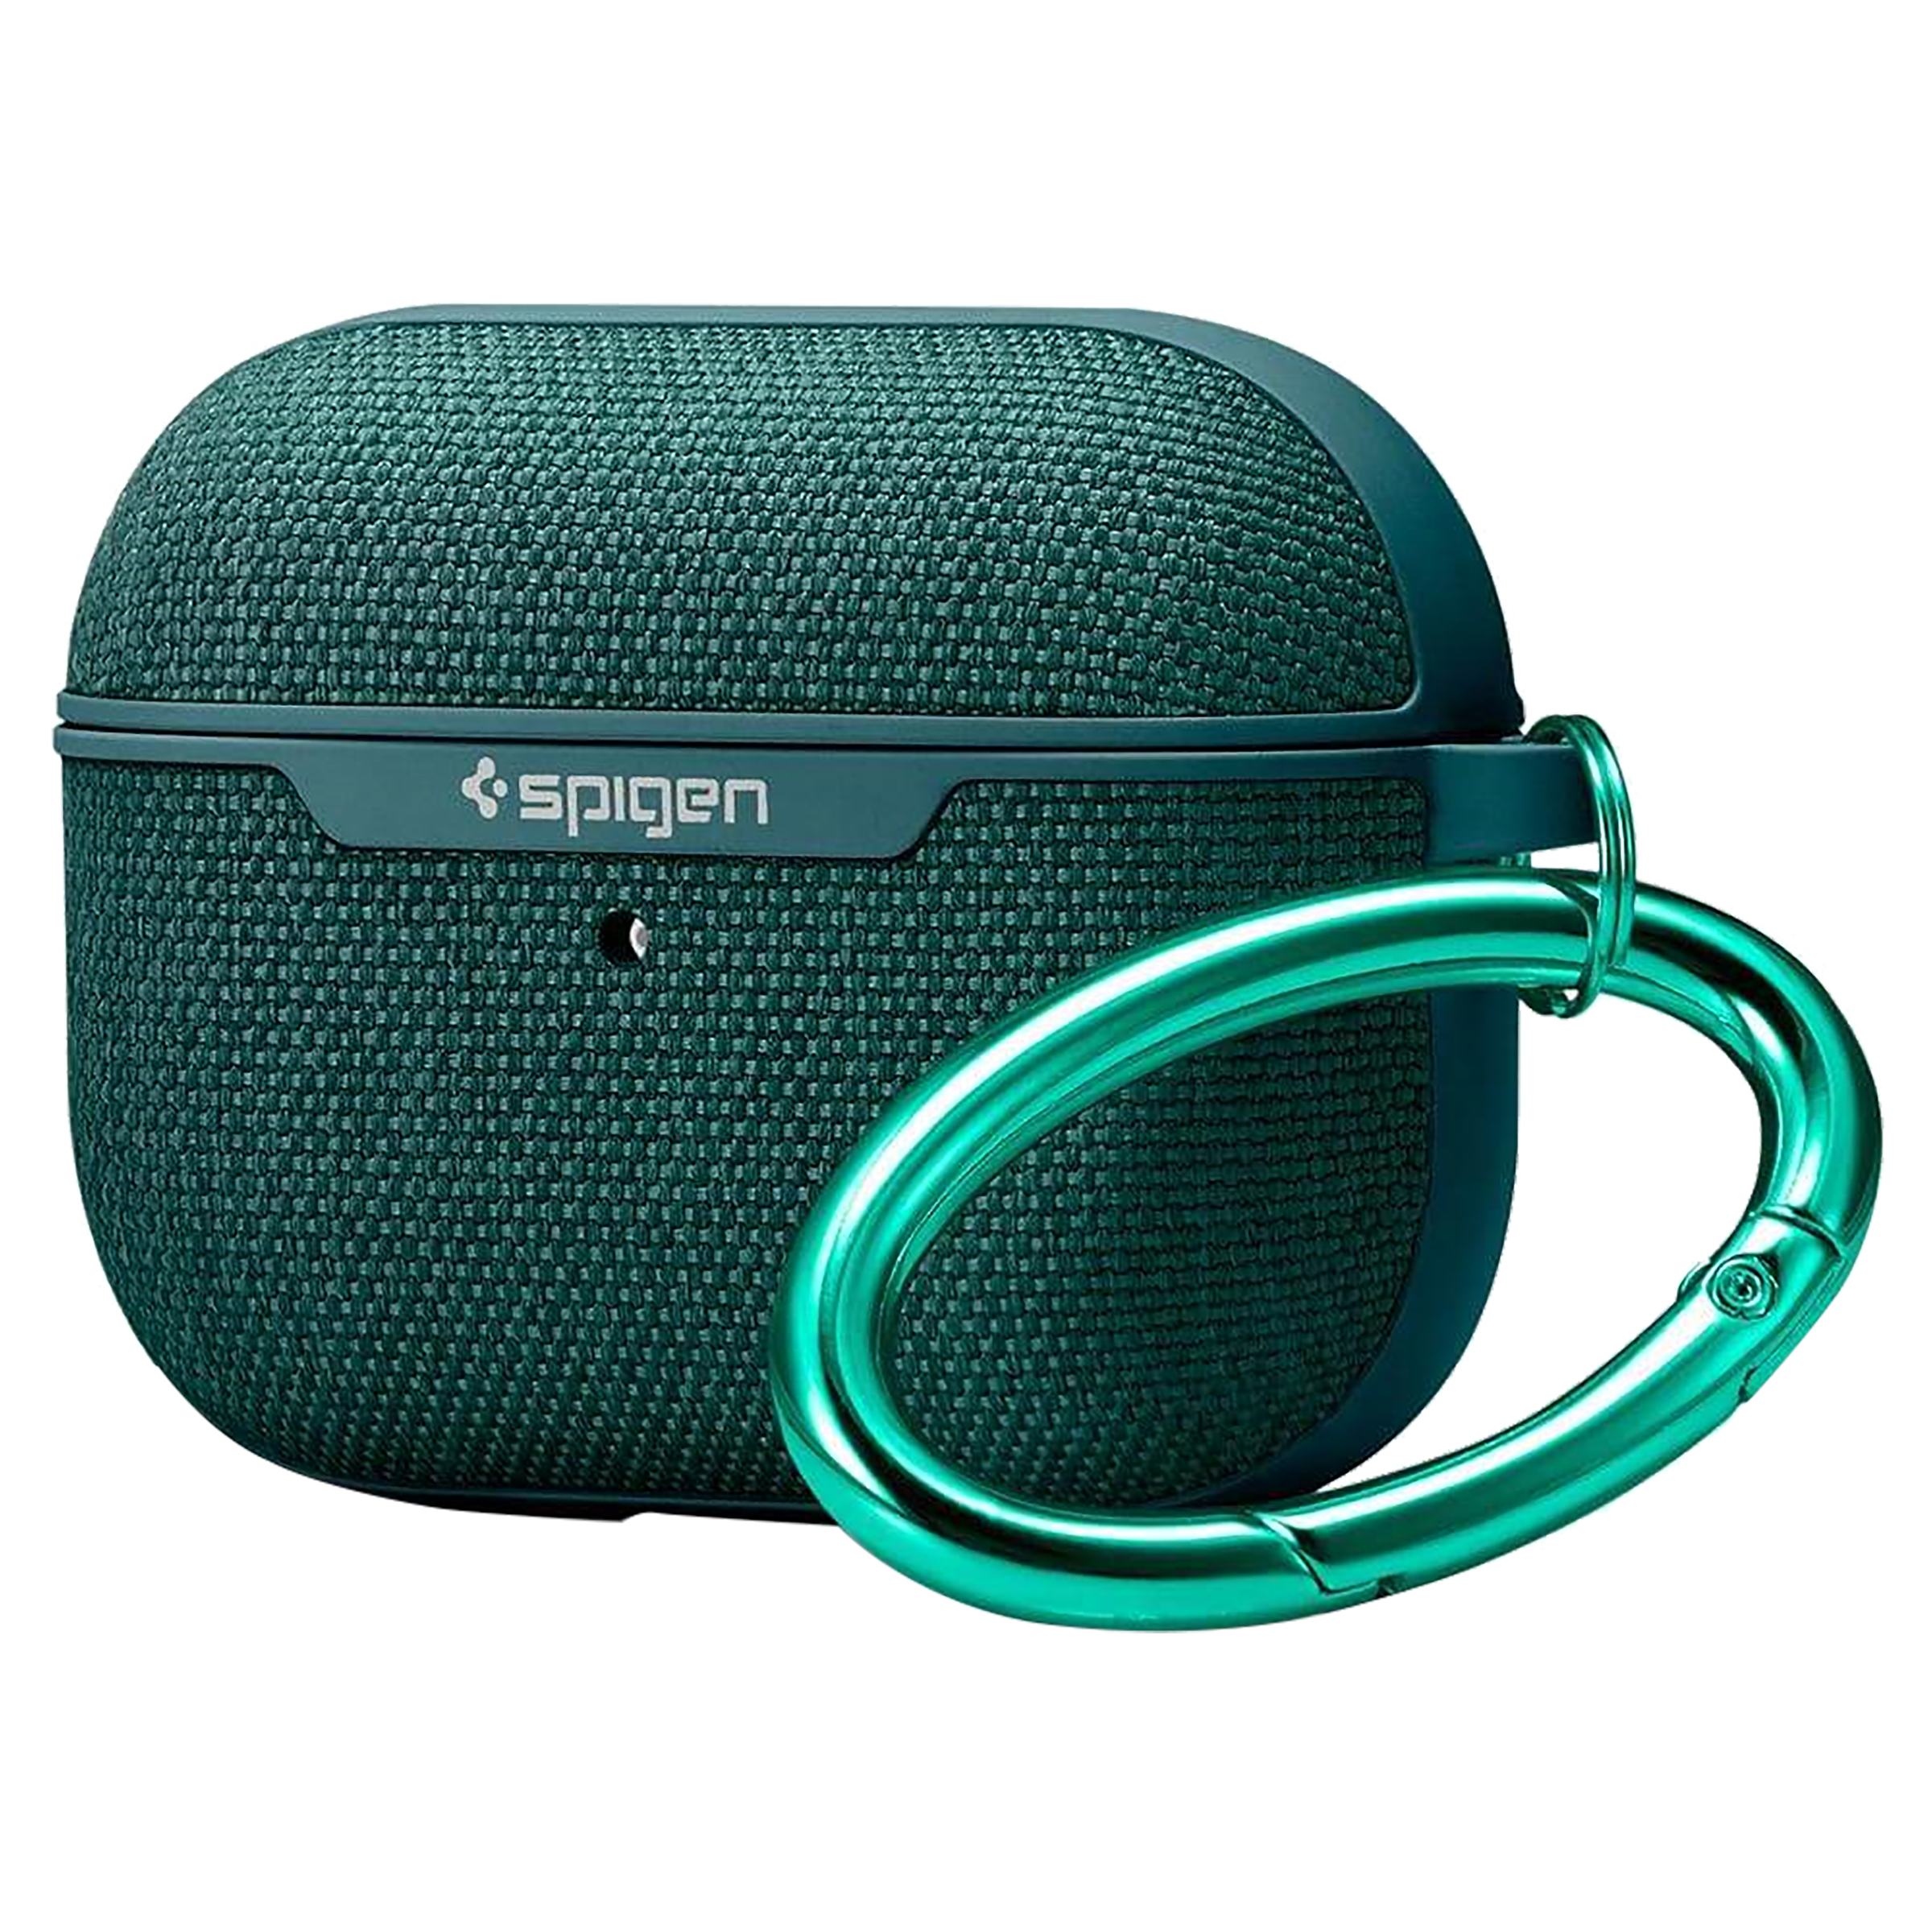 Spigen Urban Fit PC & Fabric Full Cover Case For AirPods Pro (Scratch-Free, ASD00825, Midnight Green)_1